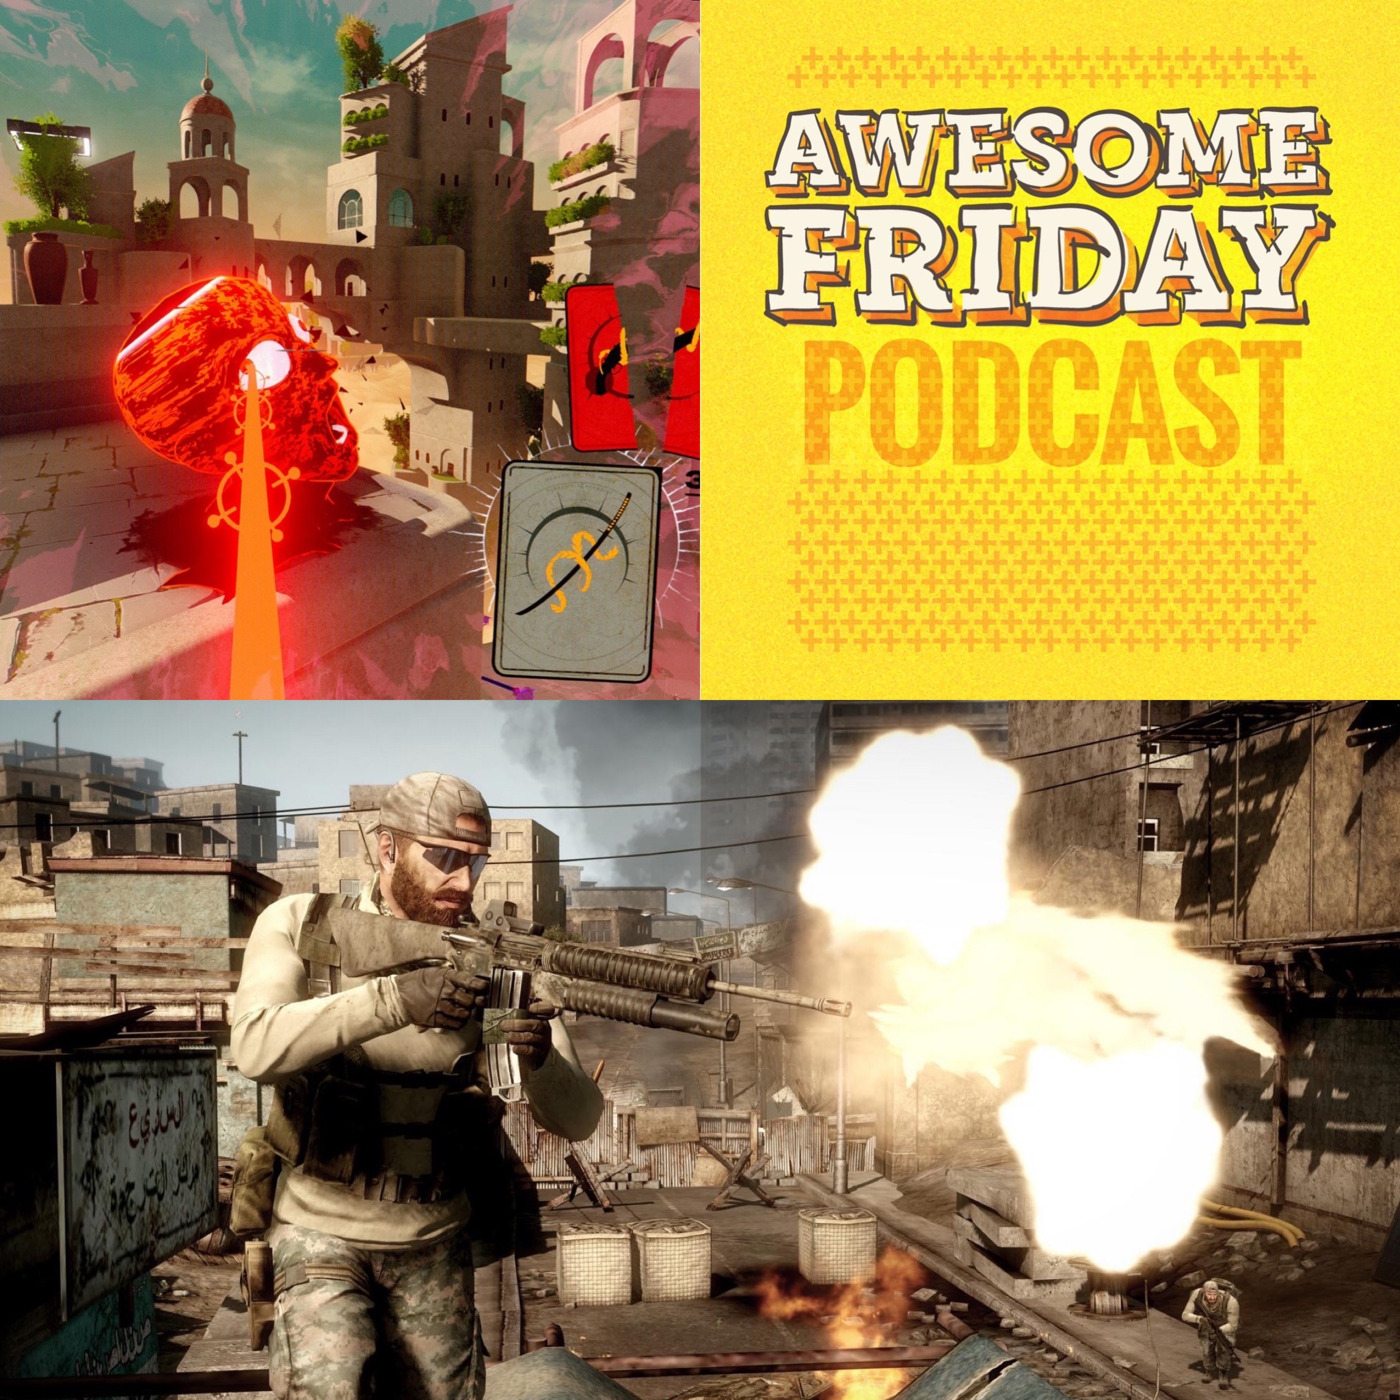 Episode 63: Games: Neon White & Medal of Honour